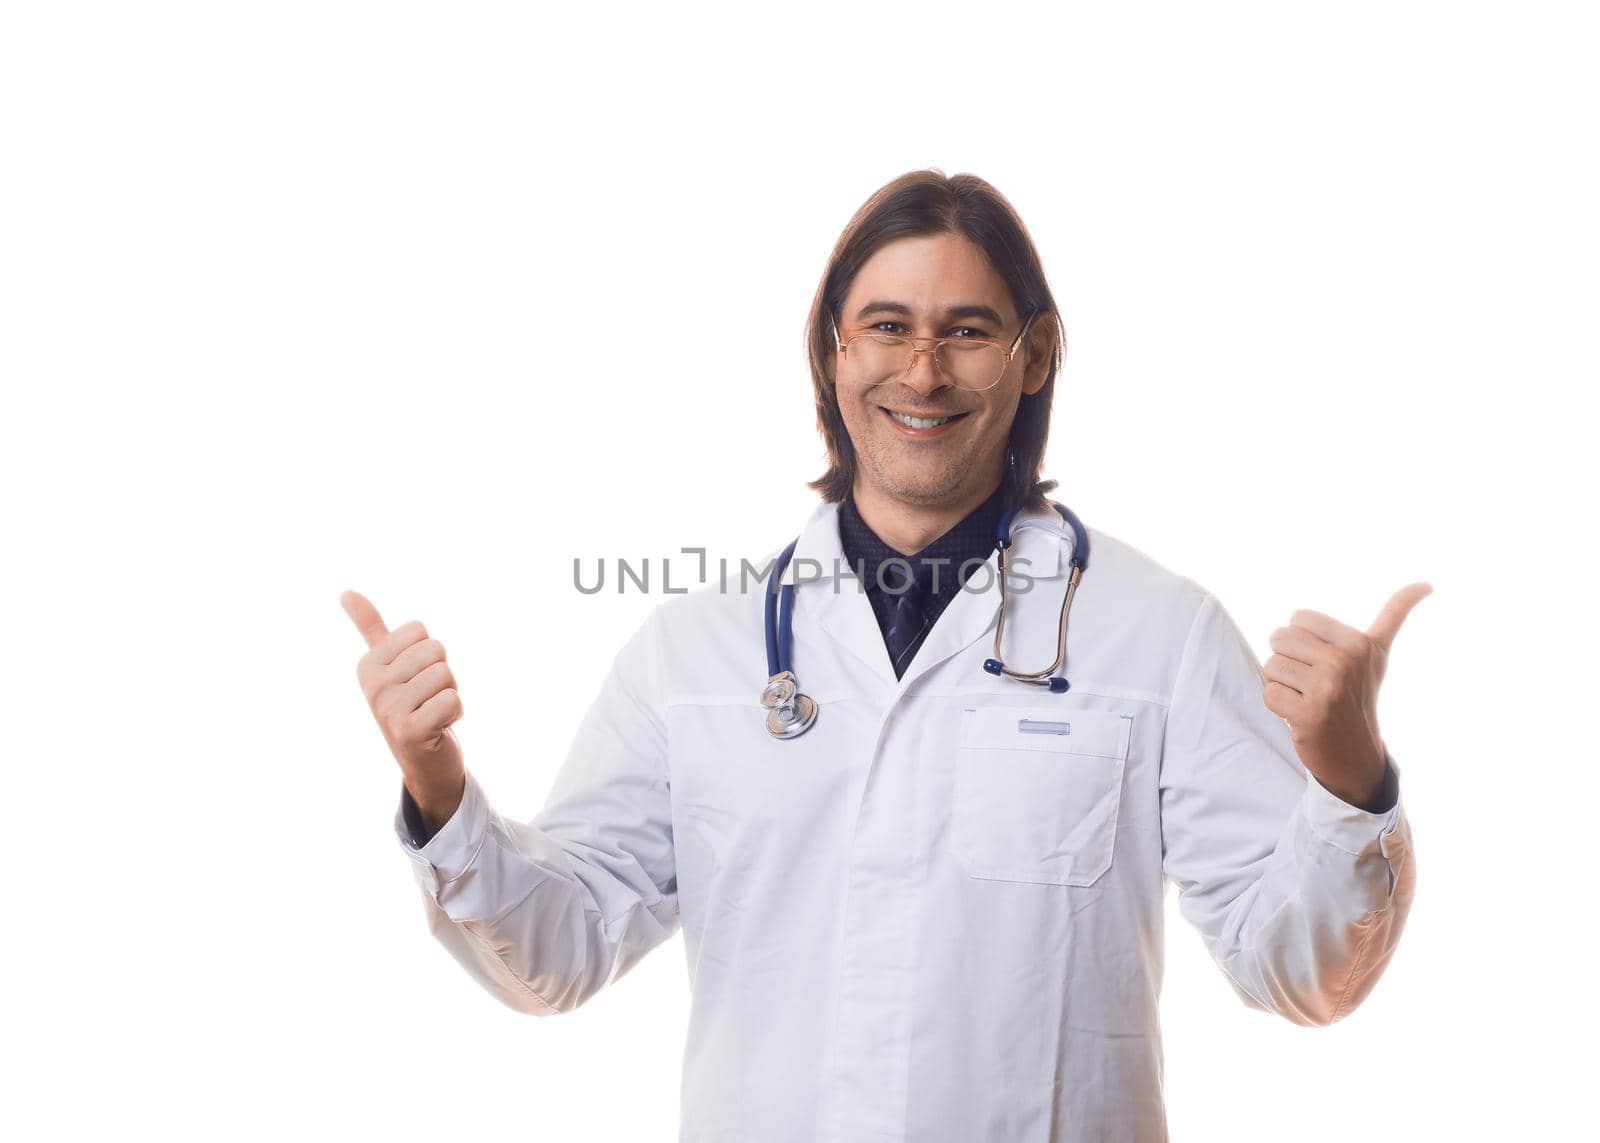 Happy smiling doctor smiling isolated over white background keeps thumbs up.